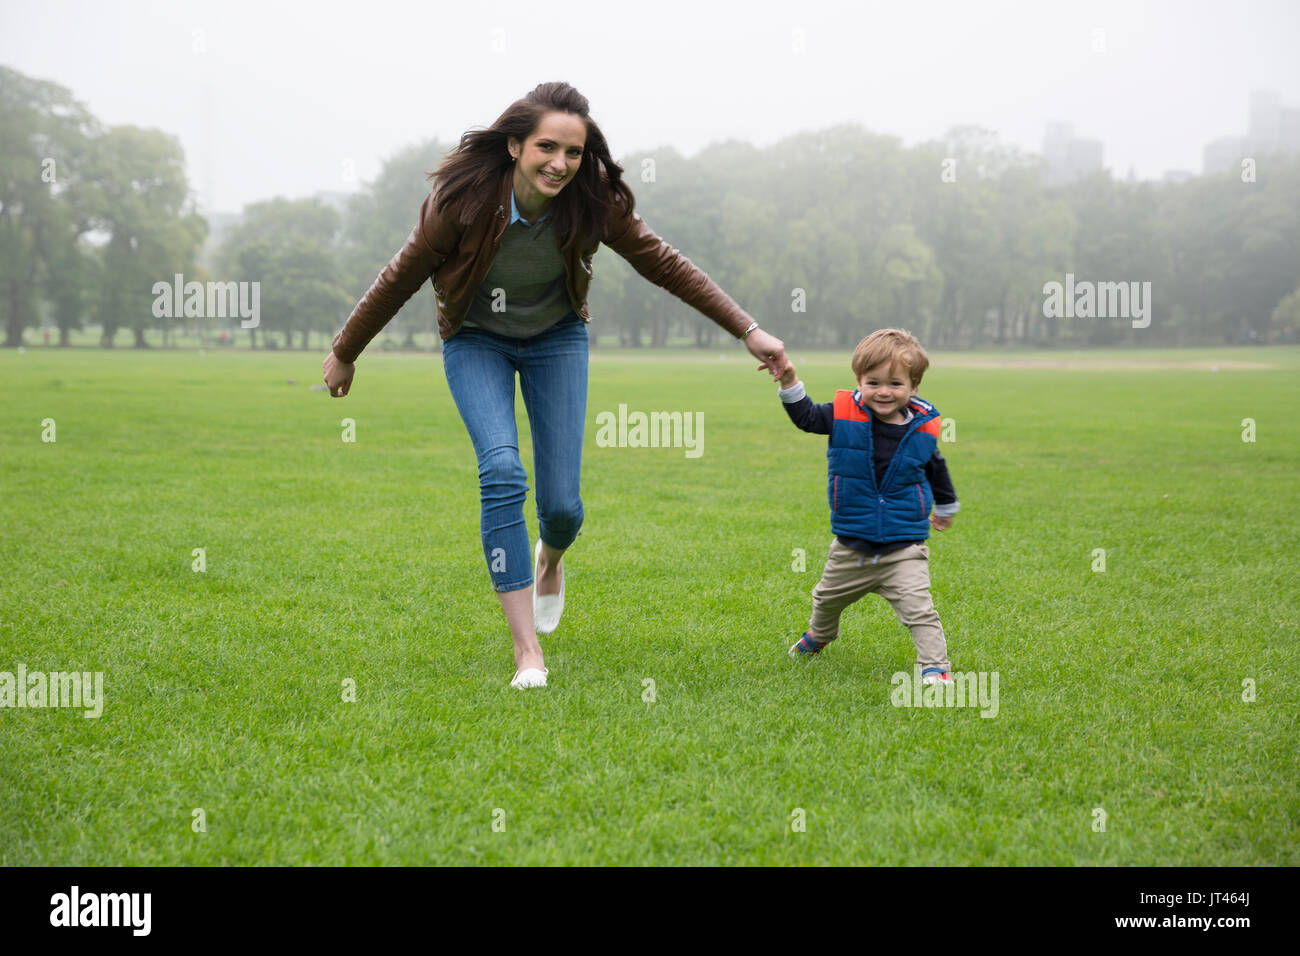 Happy Mother playing with her toddler son outdoors. Love and togetherness concept. Stock Photo